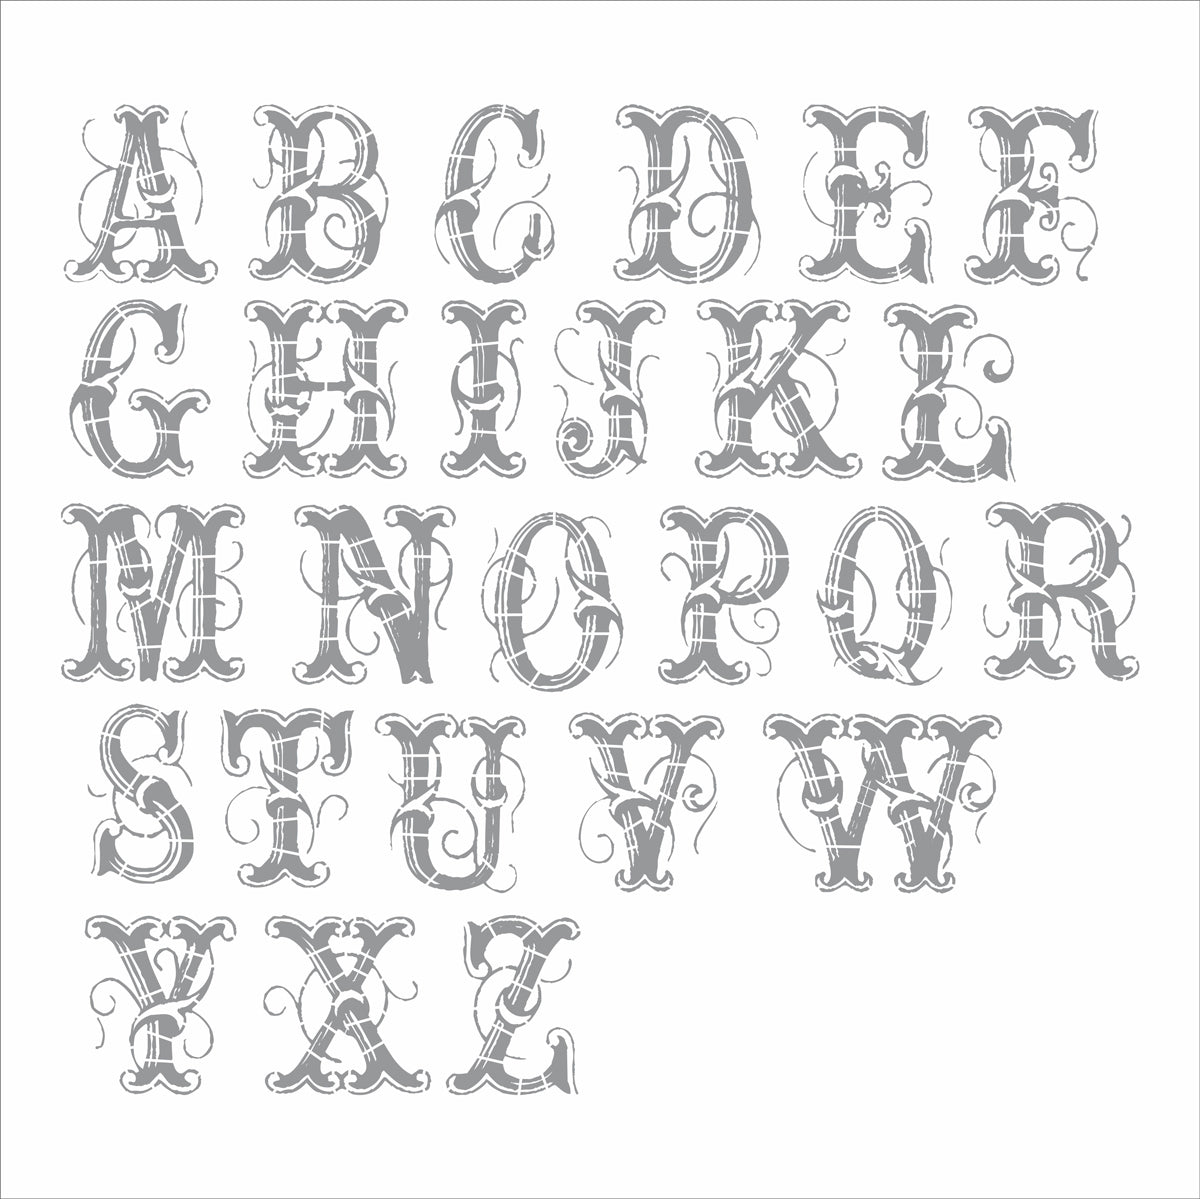 Zamira stencil letters: letter stencils and alphabets for